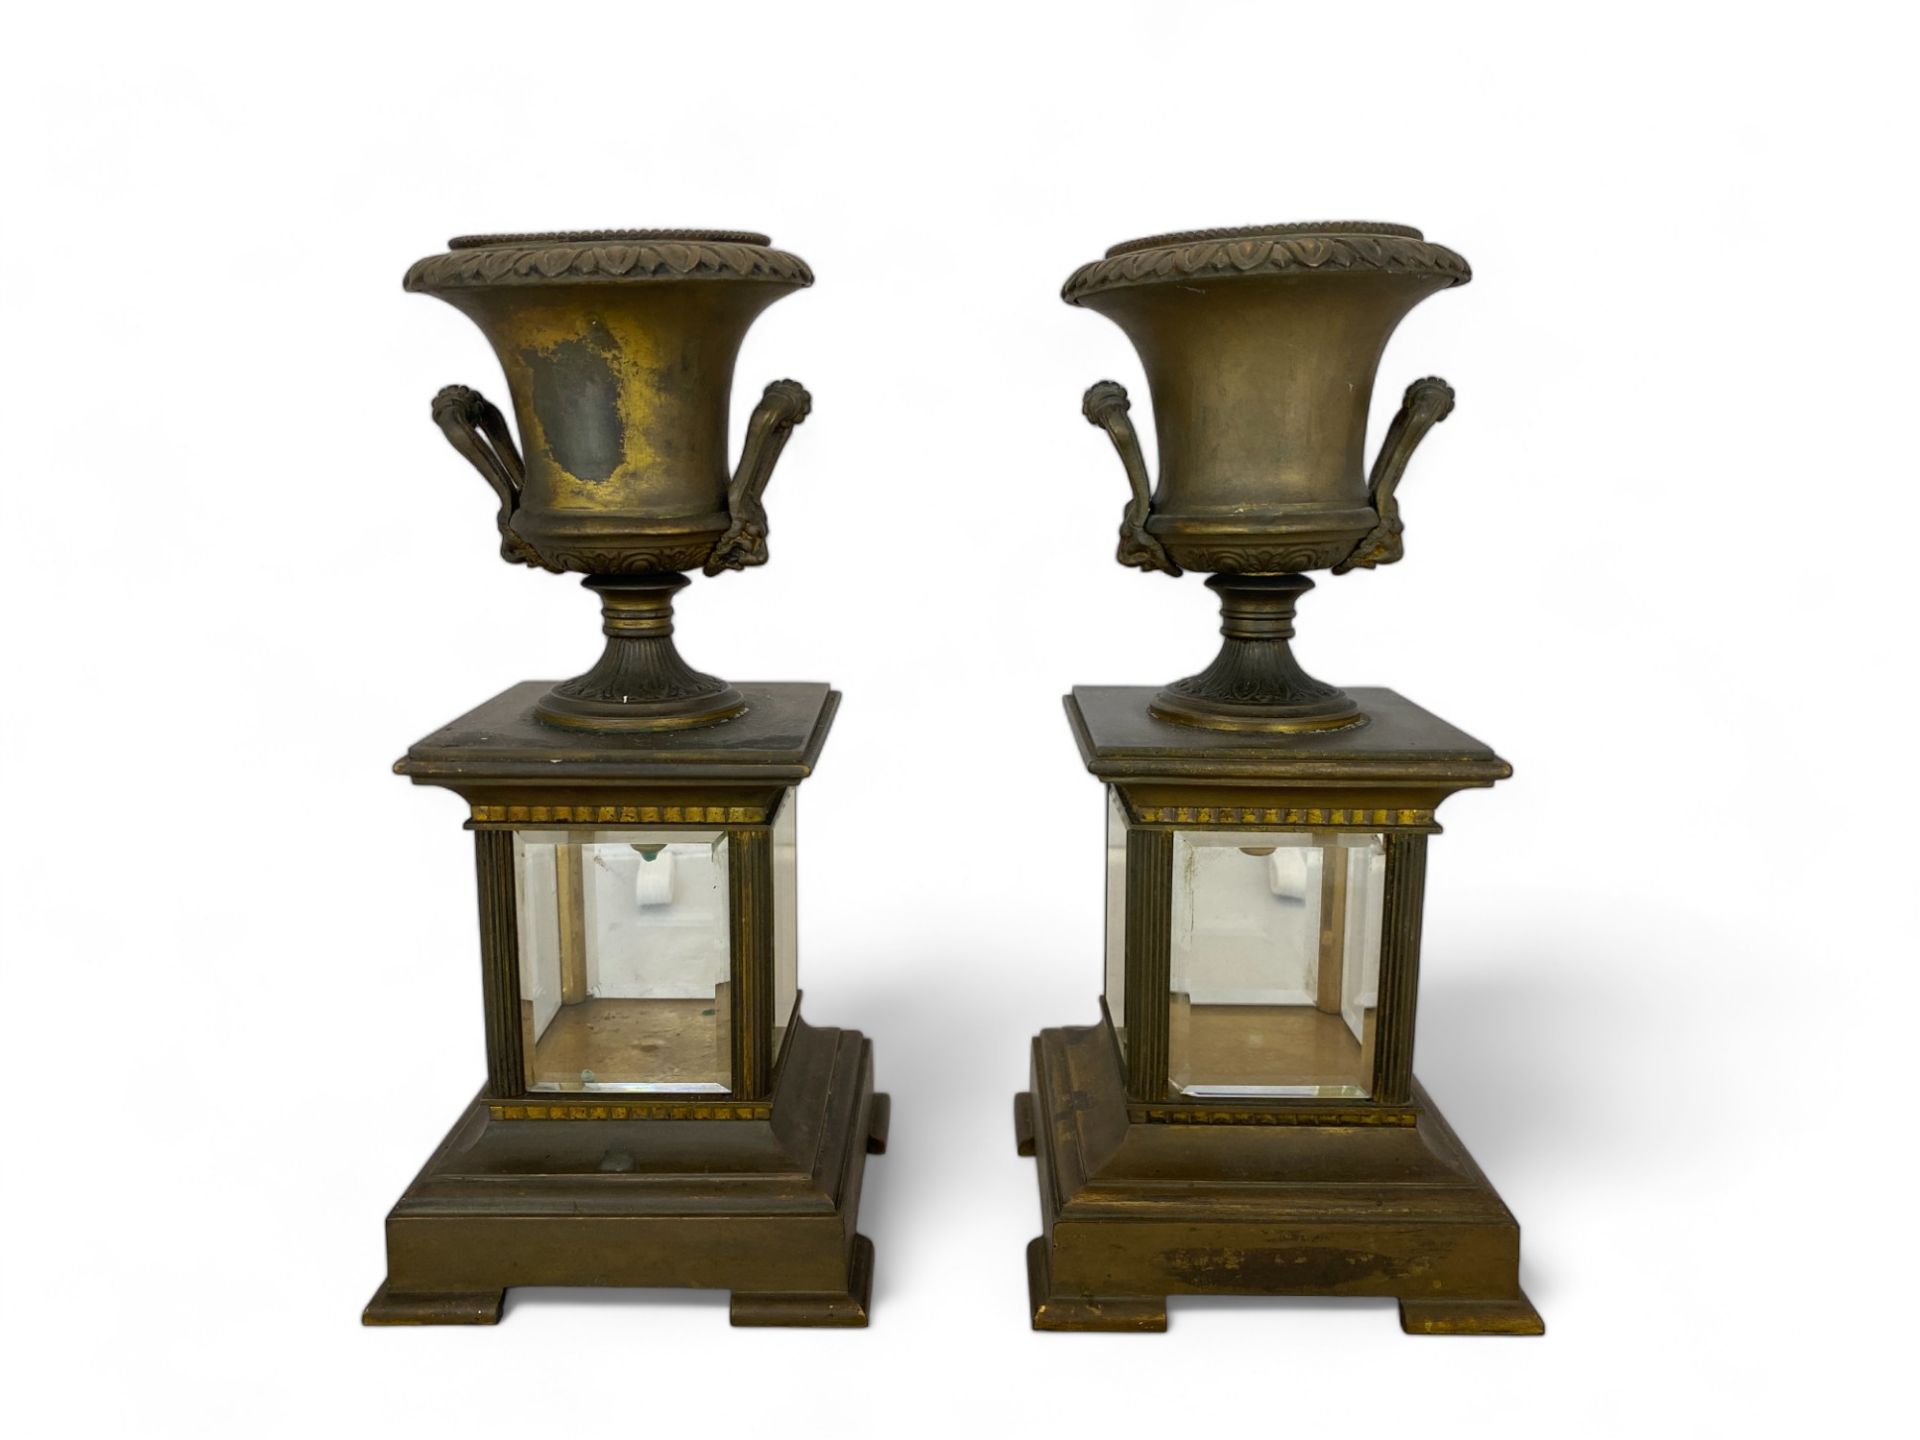 A pair of 19th century gilt bronze chimney ornaments - Image 7 of 12